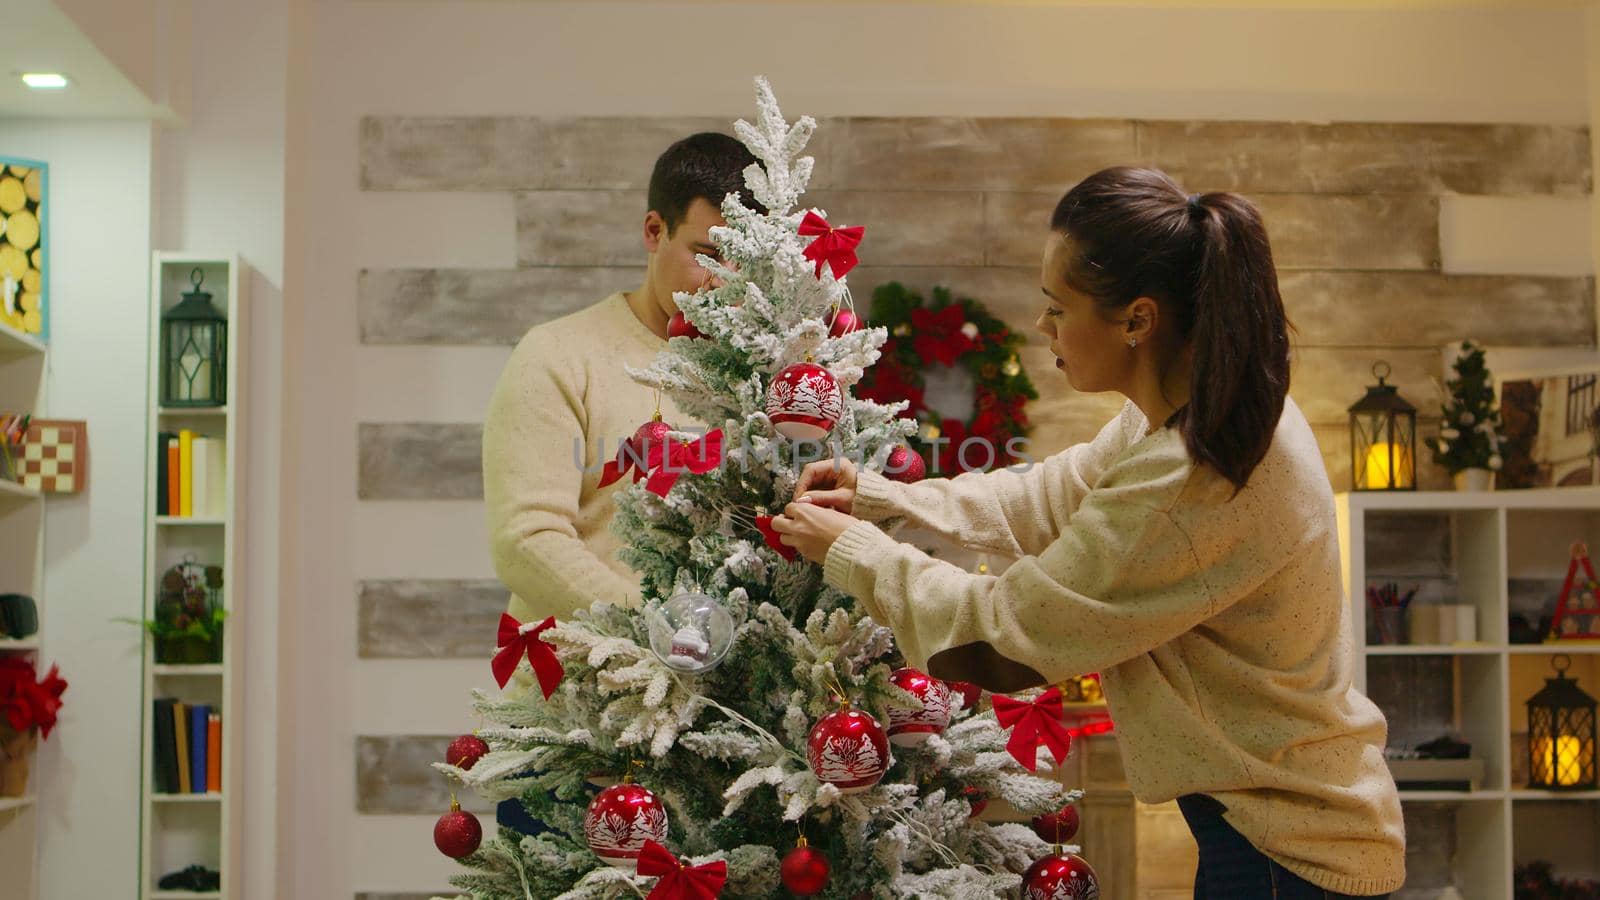 Young couple in love assembled christmas tree in living room. Romantic couple. Decorating beautiful xmas tree with glass ball decorations. Wife and husband in matching clothes helping ornate home with garland lights